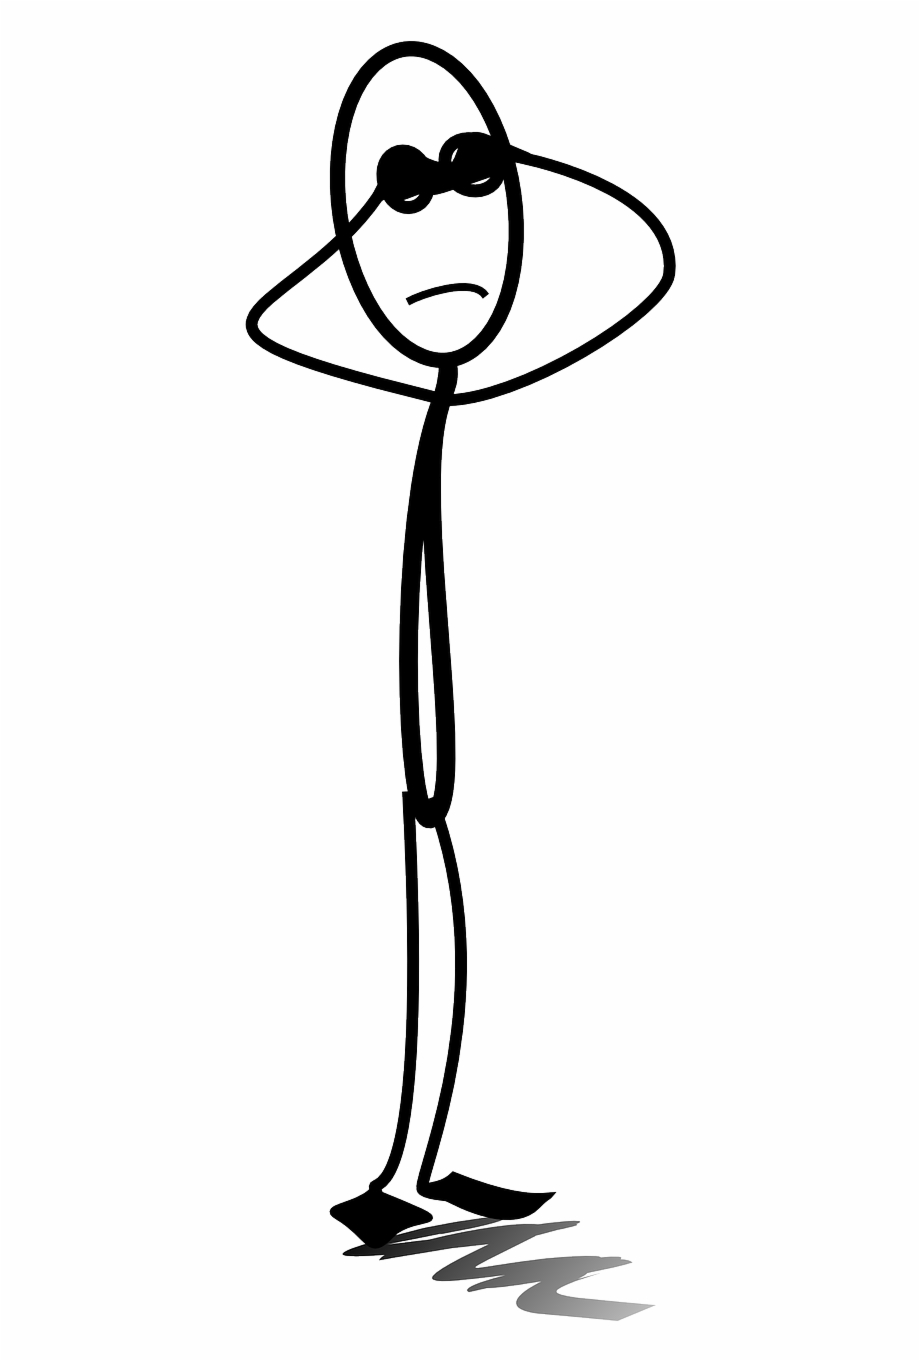 Cry Looking Stickman Png Image Angry Stickman